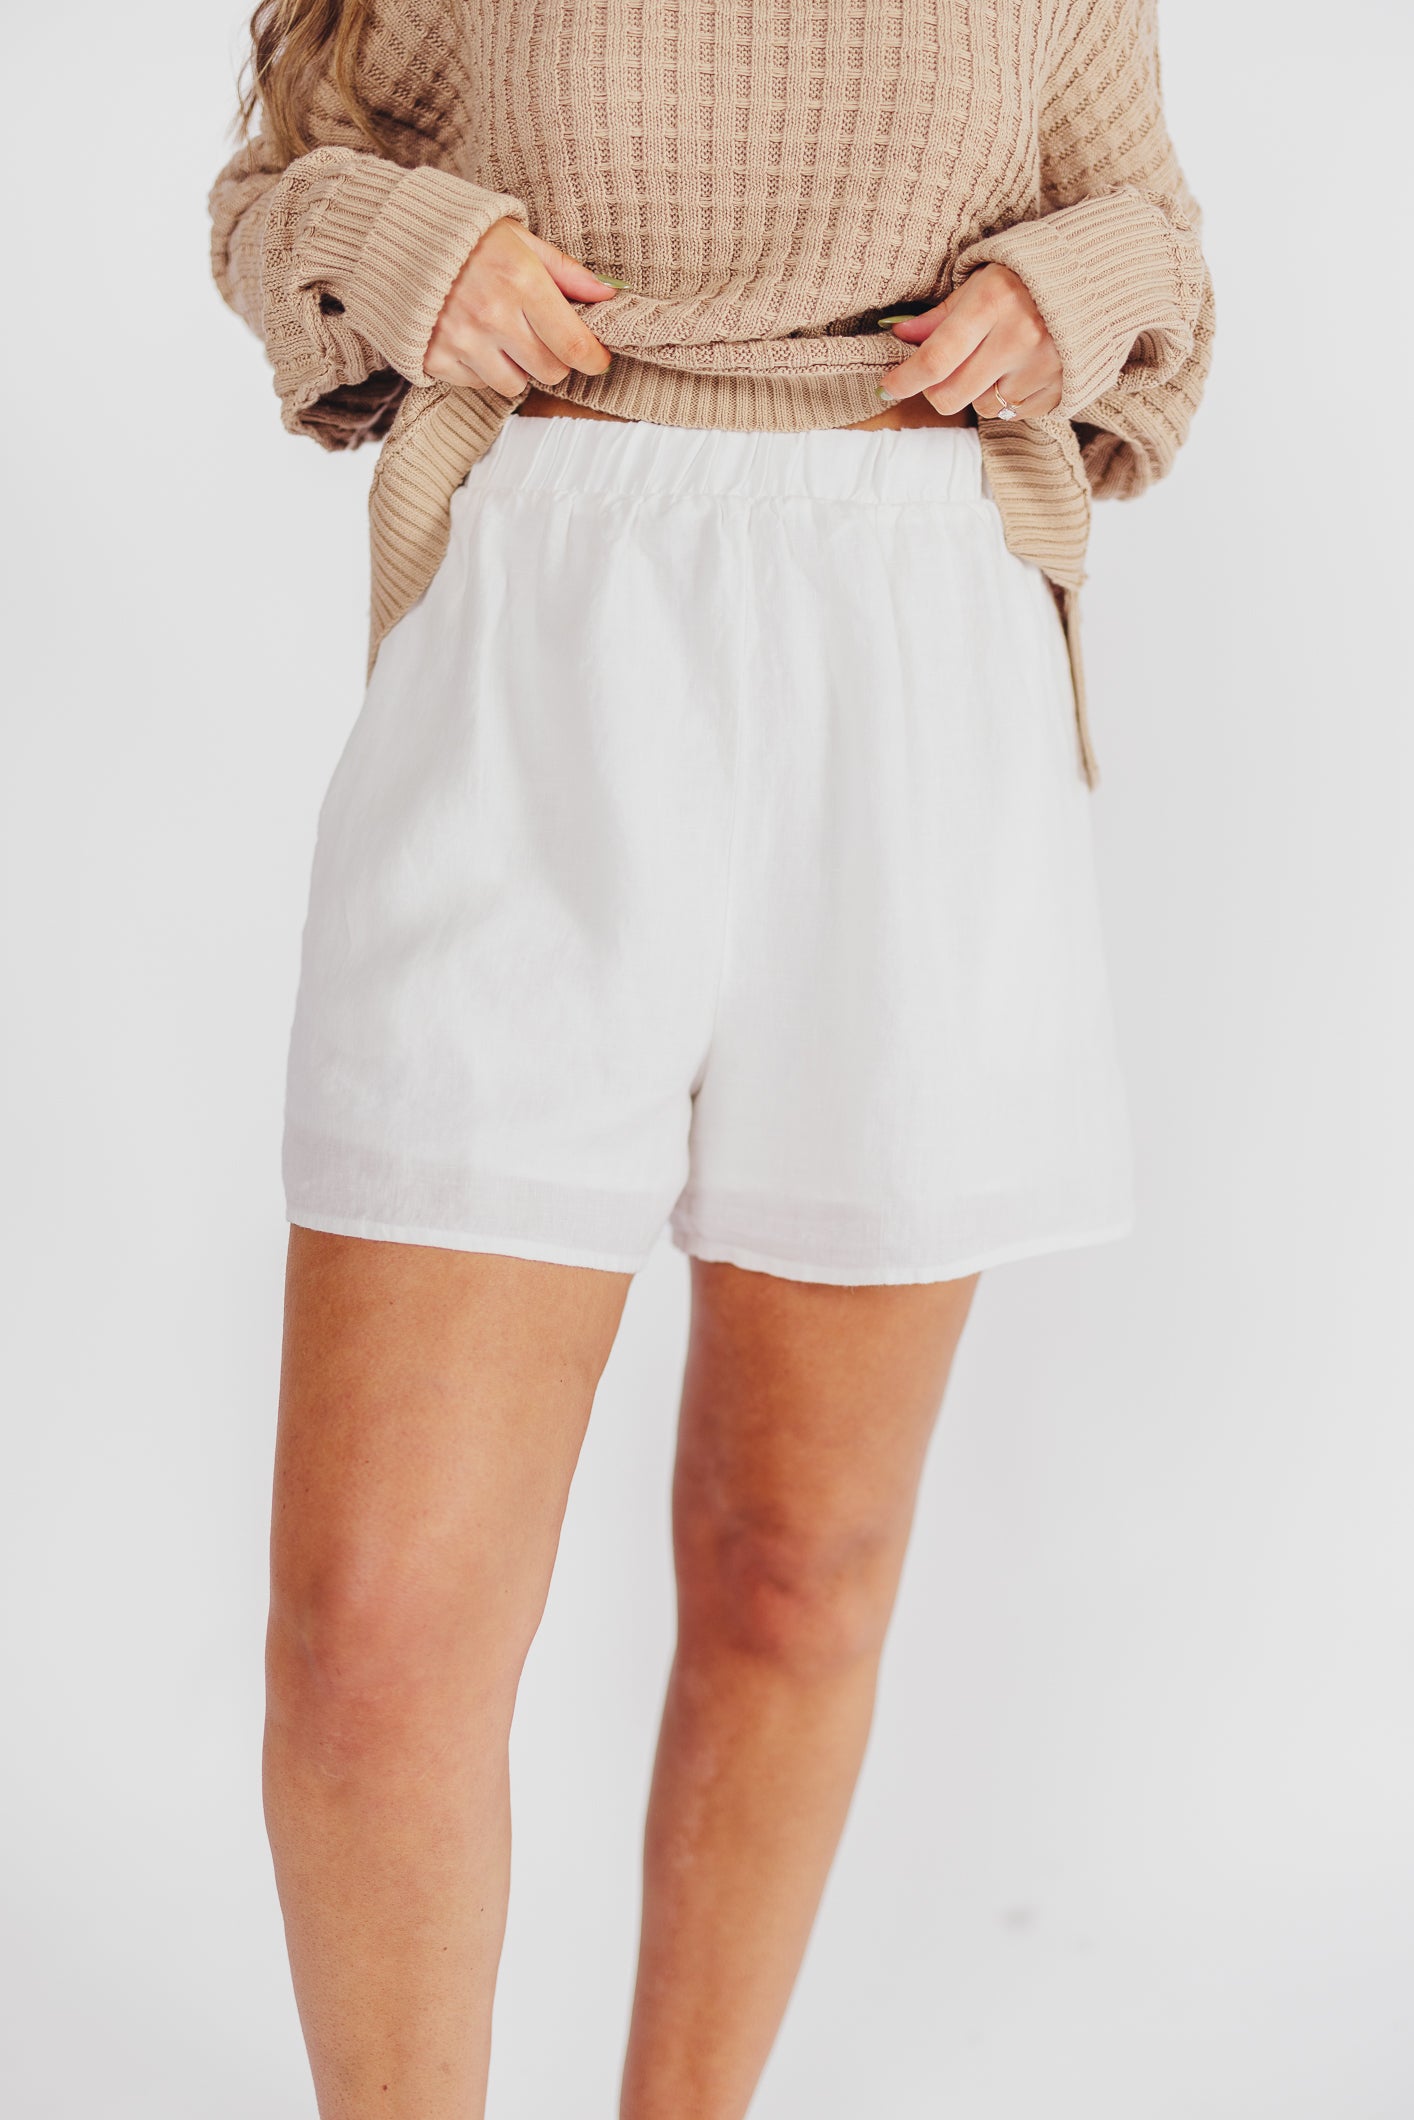 Tahlia Shorts in Off-White